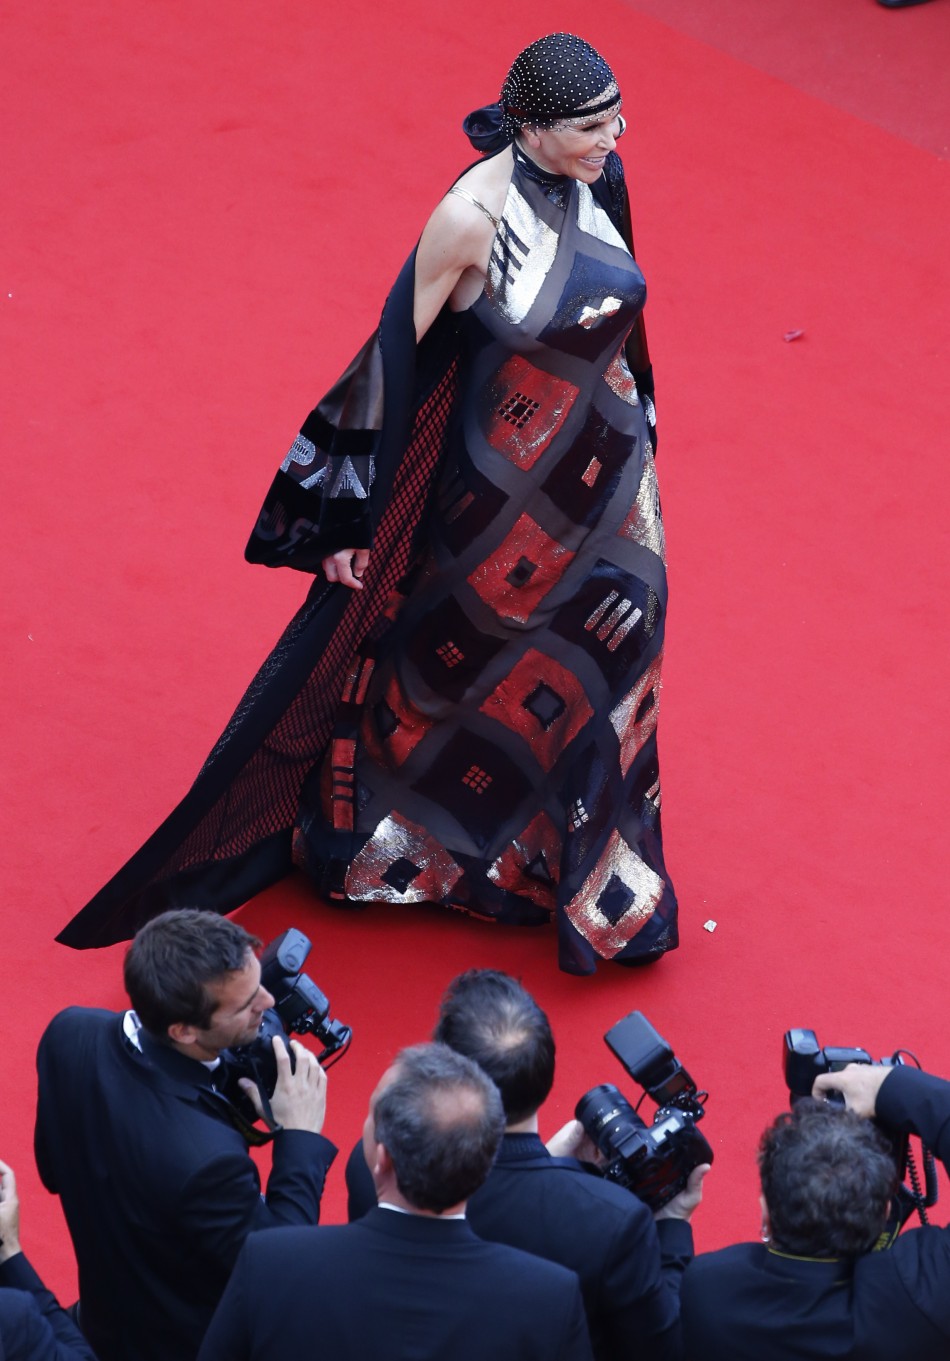 Lebanese businesswoman Mouna Ayoub poses on the red carpet as she arrives for the screening of the film Inside Llewyn Davis in competition during the 66th Cannes Film Festival in Cannes May 19, 2013.